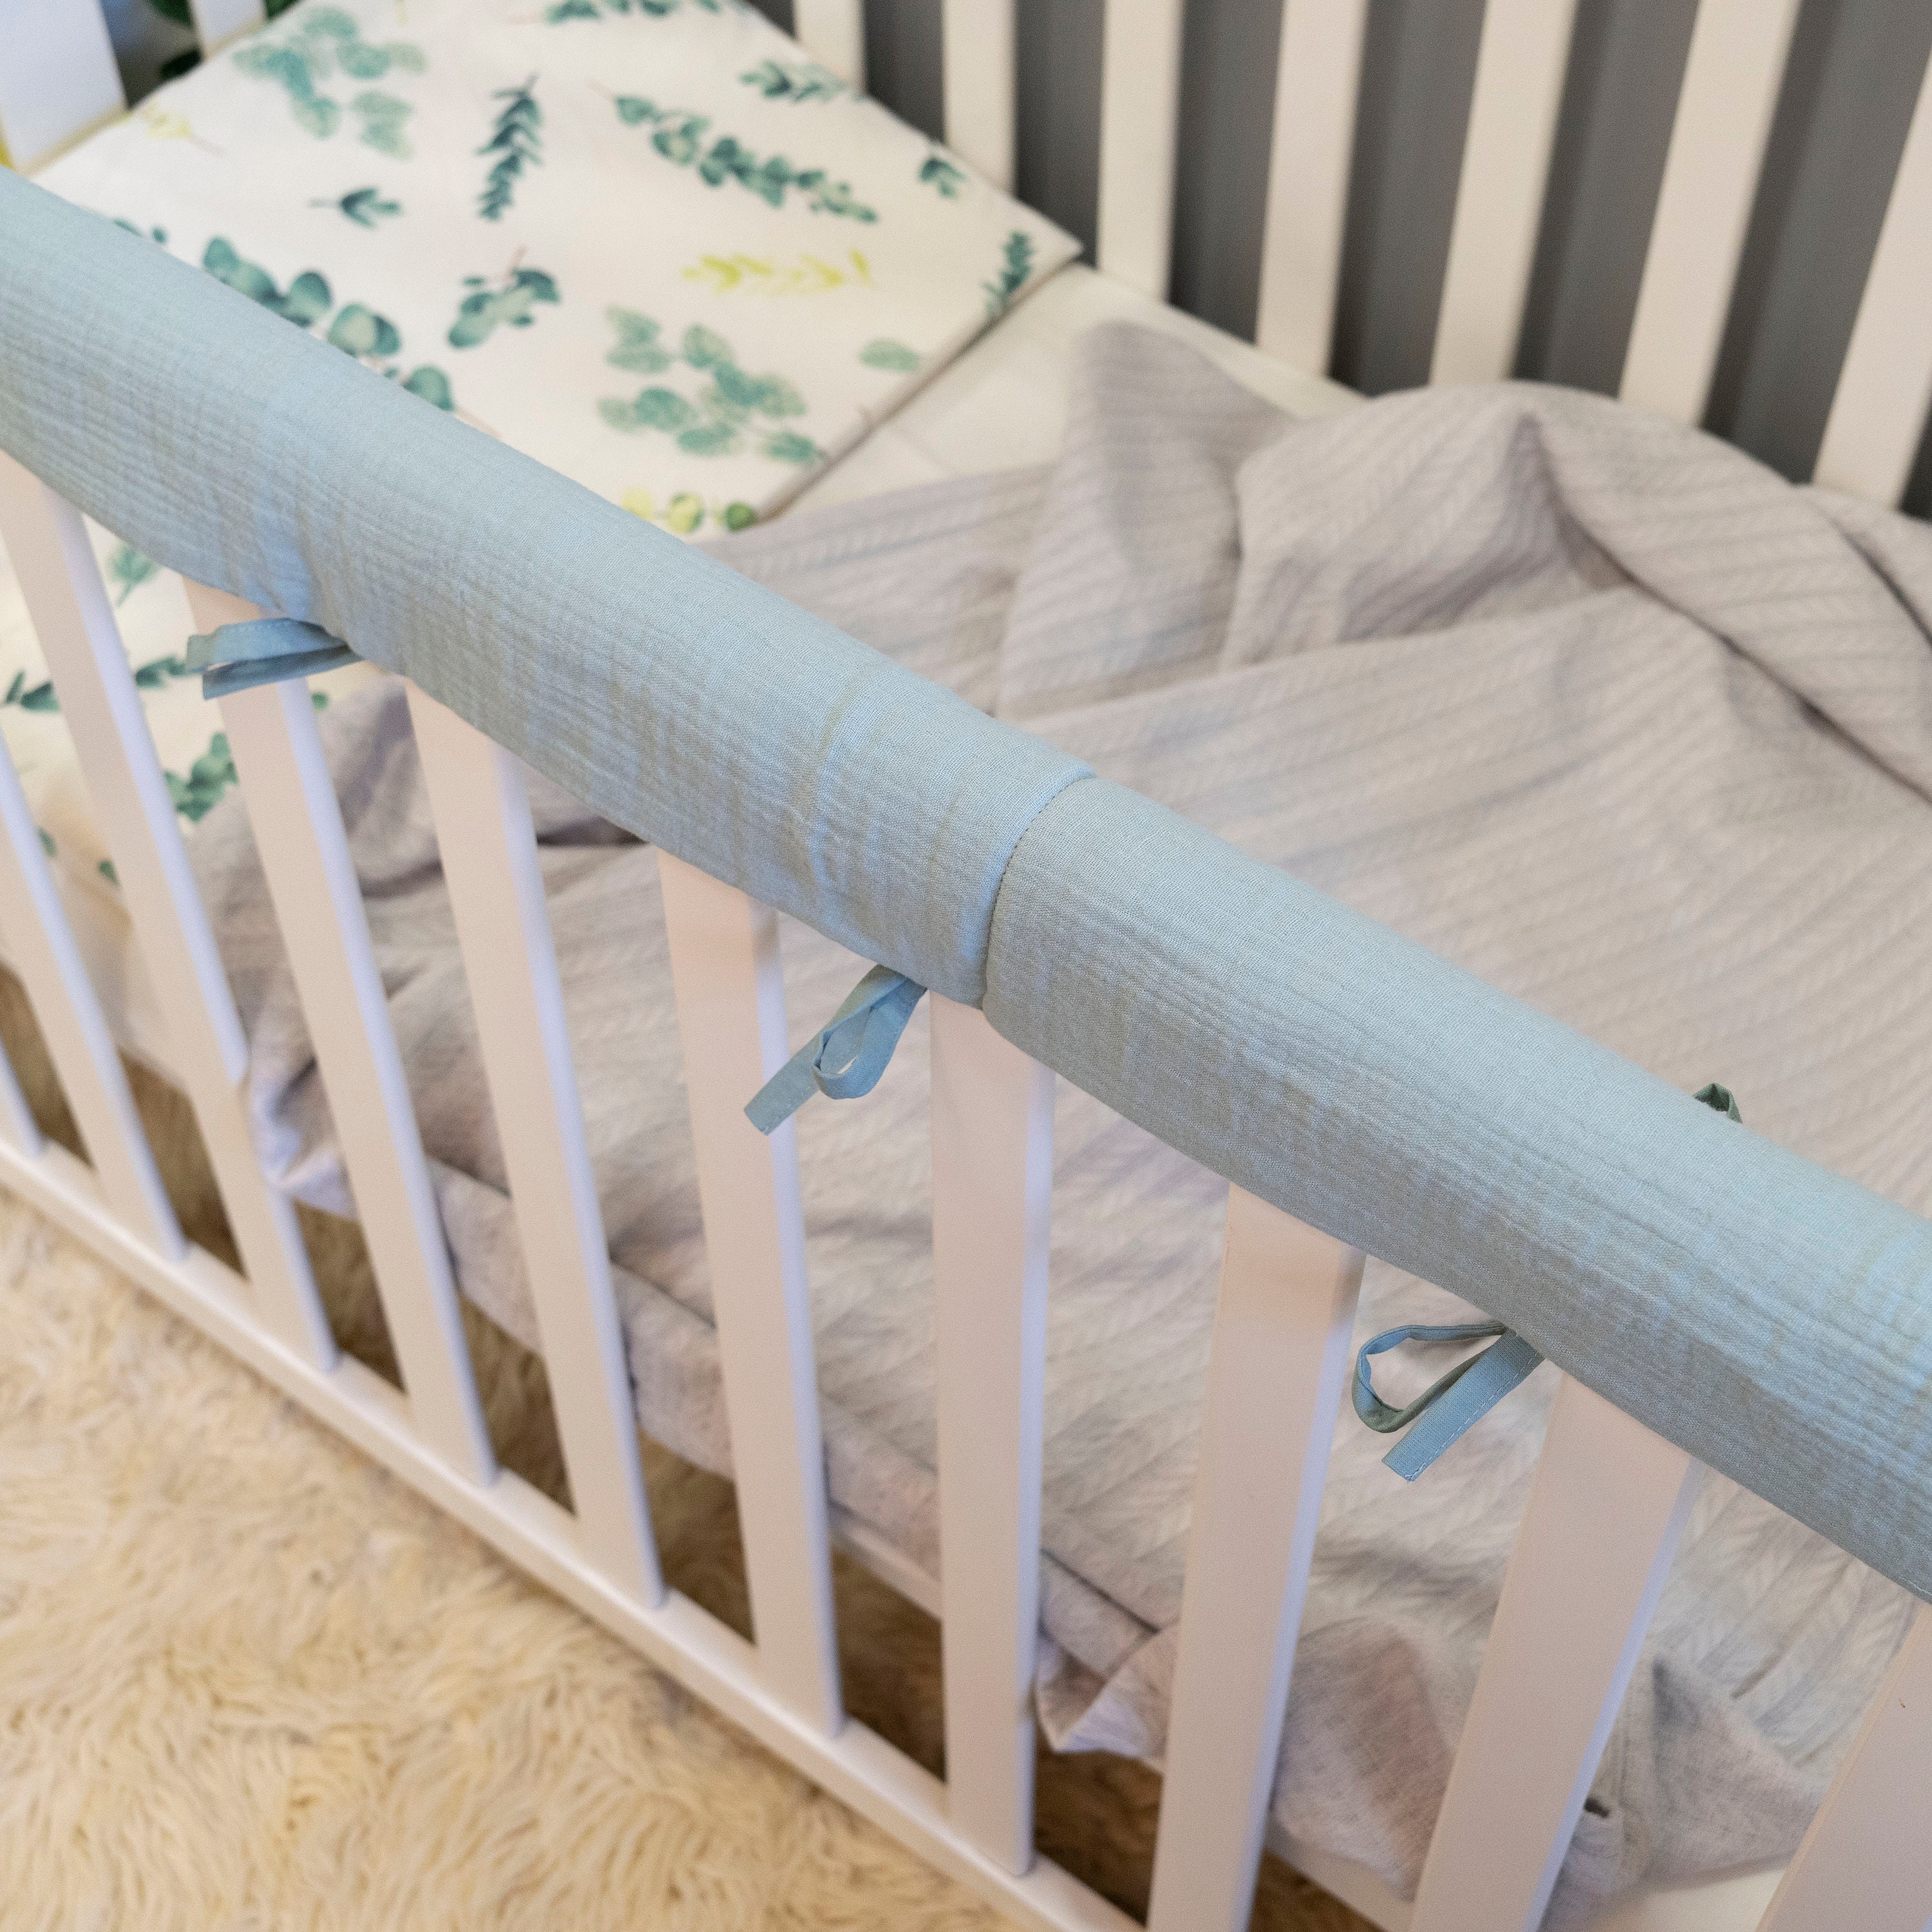 Simple Printed Crib Padding For Rails For Children Thicken Cotton Crib  Bumper With Anti Biting Strip, Splicing Bed Side Cushion For Safe Wrapping  Side 230816 From Qiyuan06, $12.87